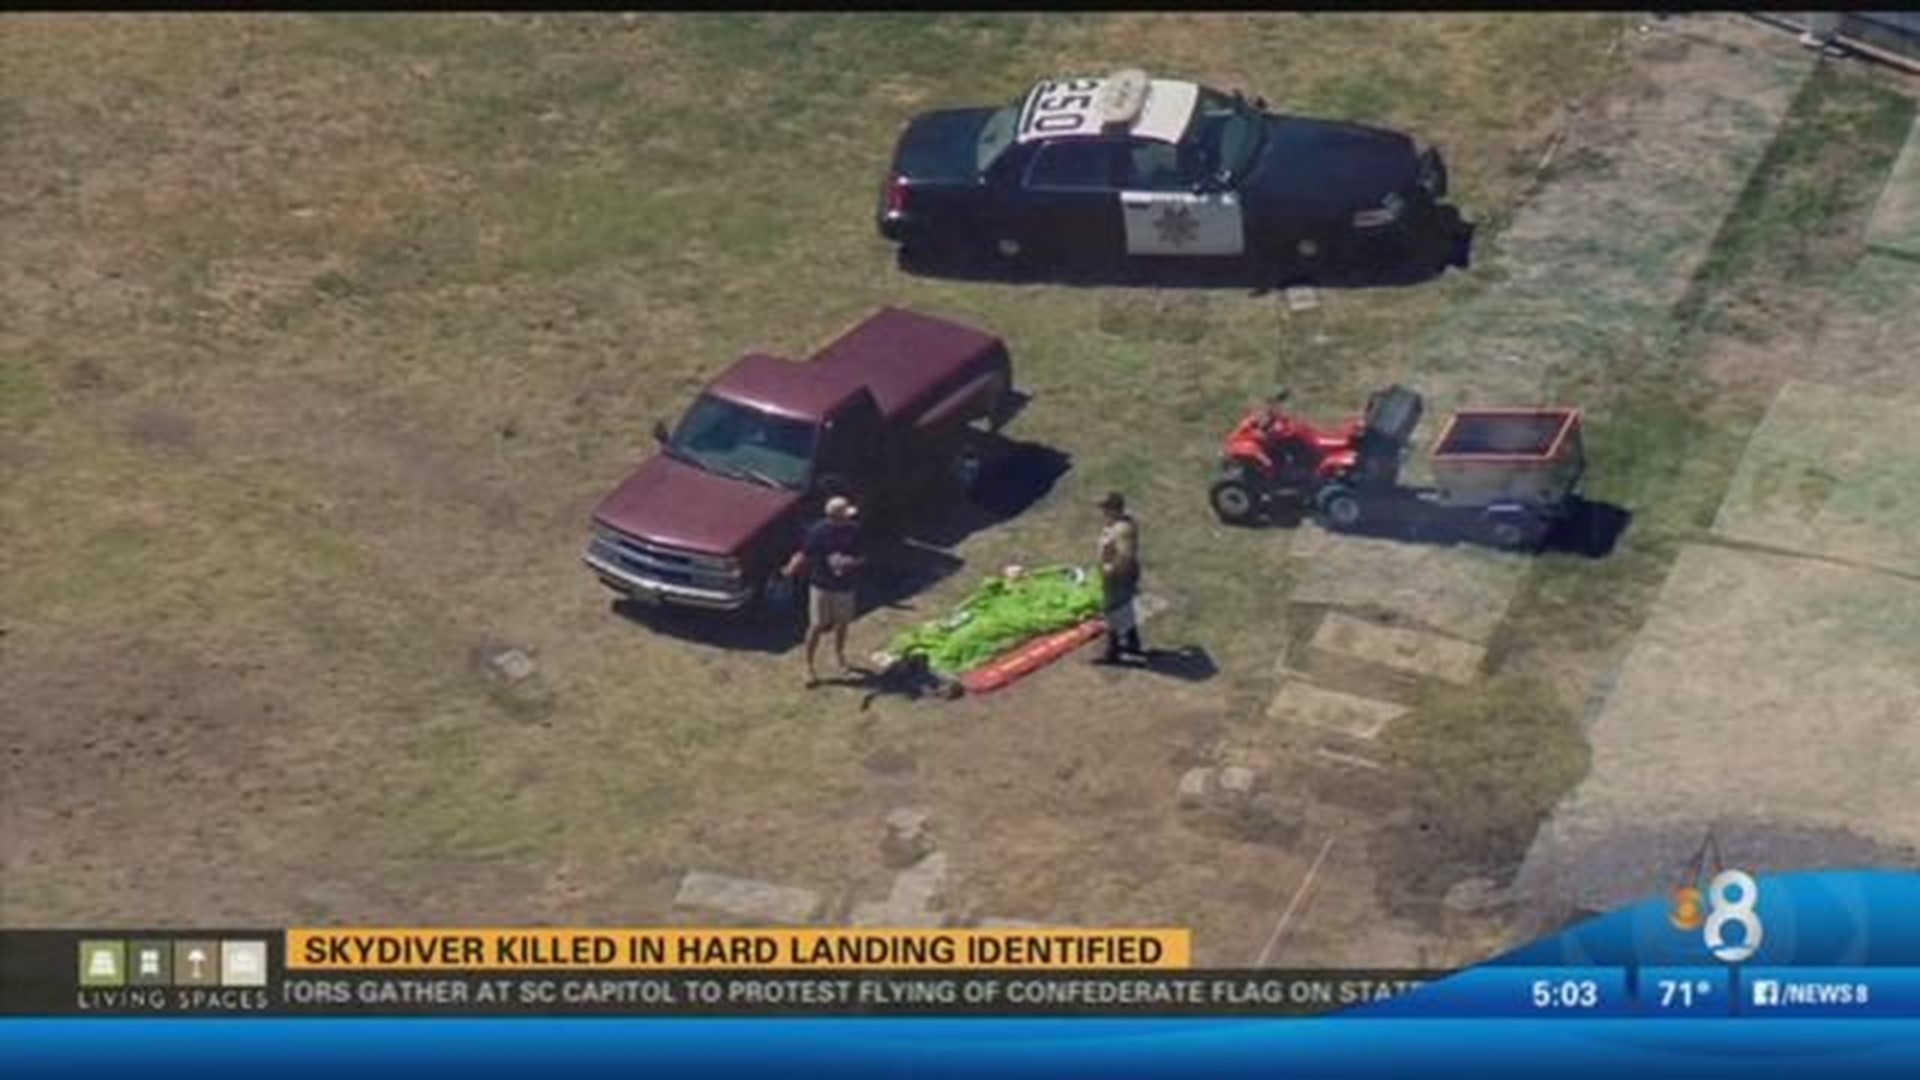 Skydiver killed in accident identified